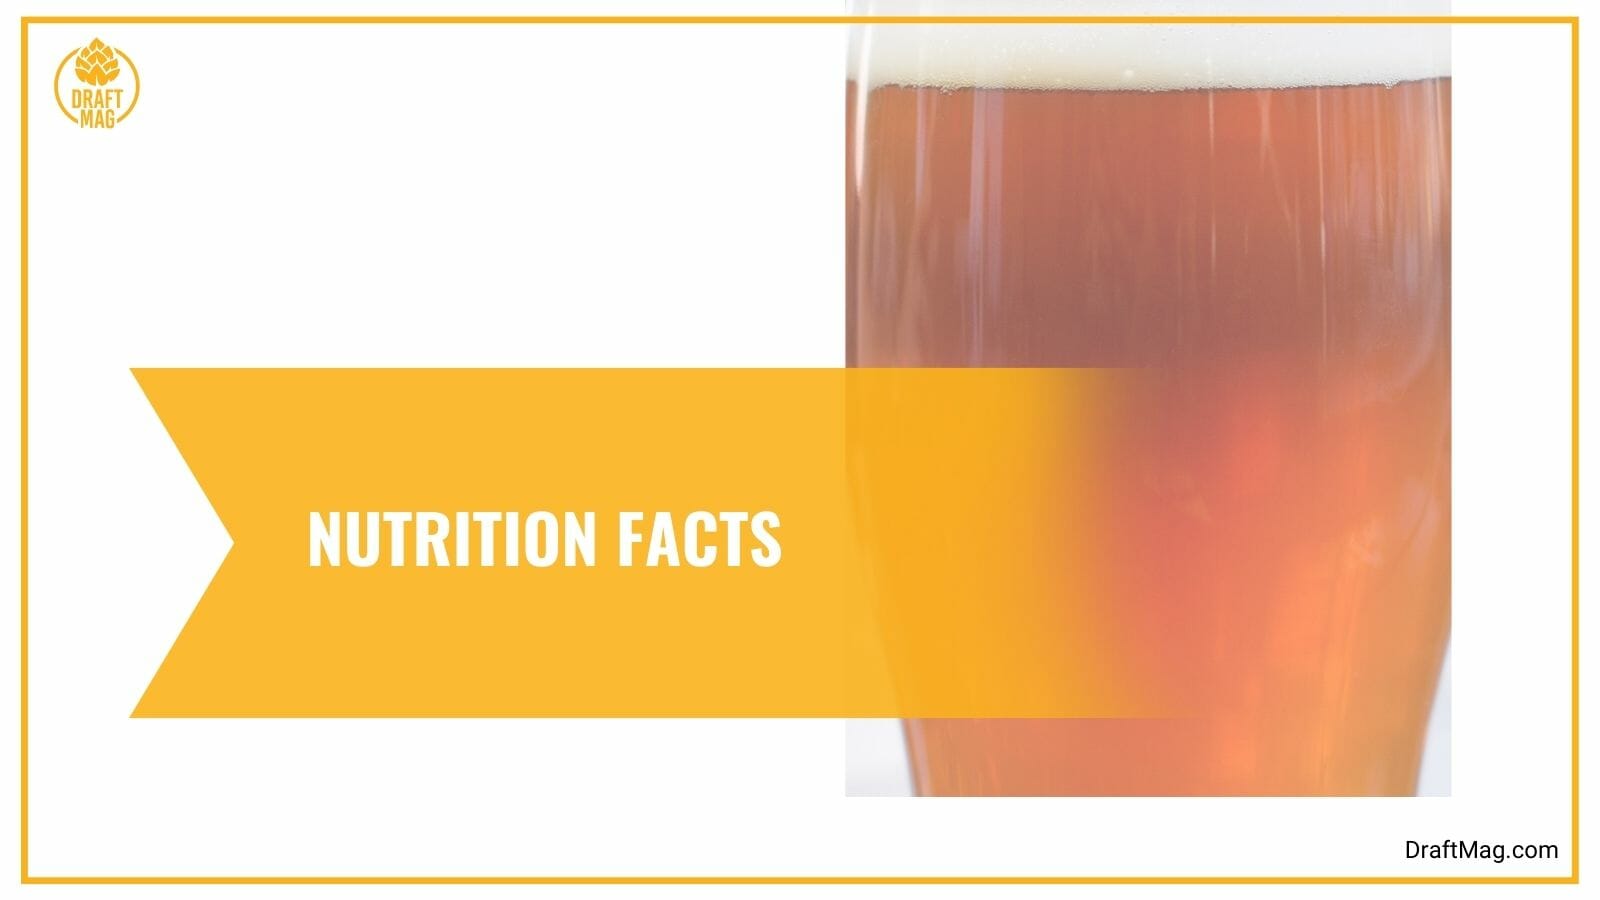 Nutrition Facts of Dragoon IPA